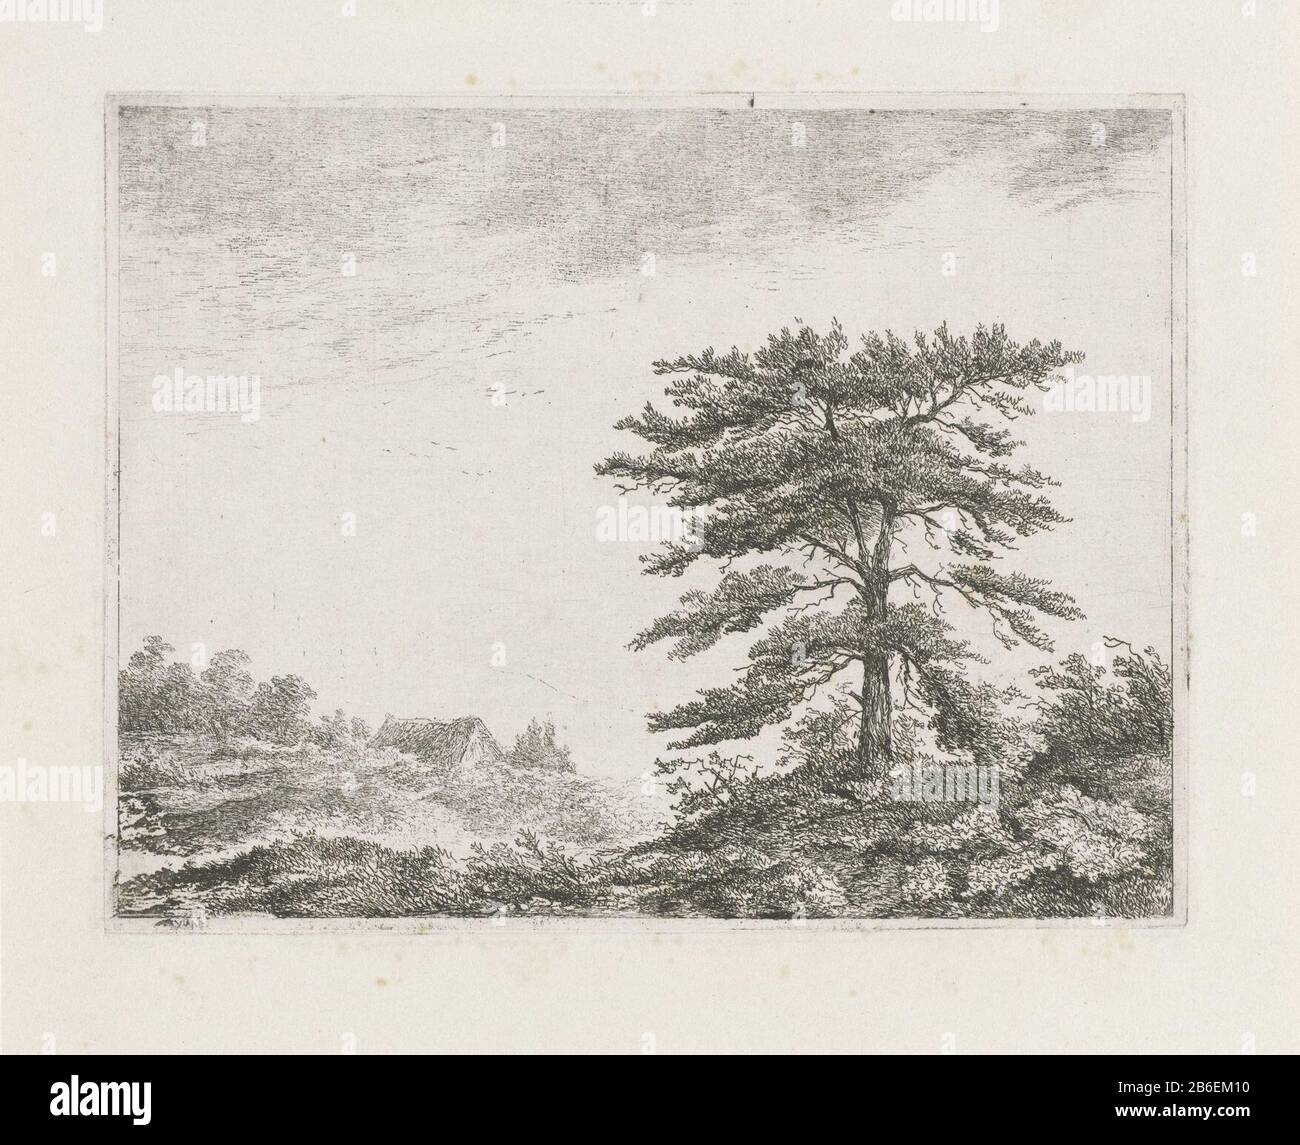 Tree in a heath a tree in a hilly moorland. Left the roof of a huis. Manufacturer : printmaker Christiaan Wilhelmus Moorrees (listed building) in its design: Christiaan Wilhelmus Moorrees manufacture Place: Netherlands Date: 1811 - 1867 Physical features: etching on chine collé; proofing material: paper chine collé Technique: etching Dimensions: plate edge: H 126 mm × W 163 mm Subject: shrubs: broom tree Stock Photo